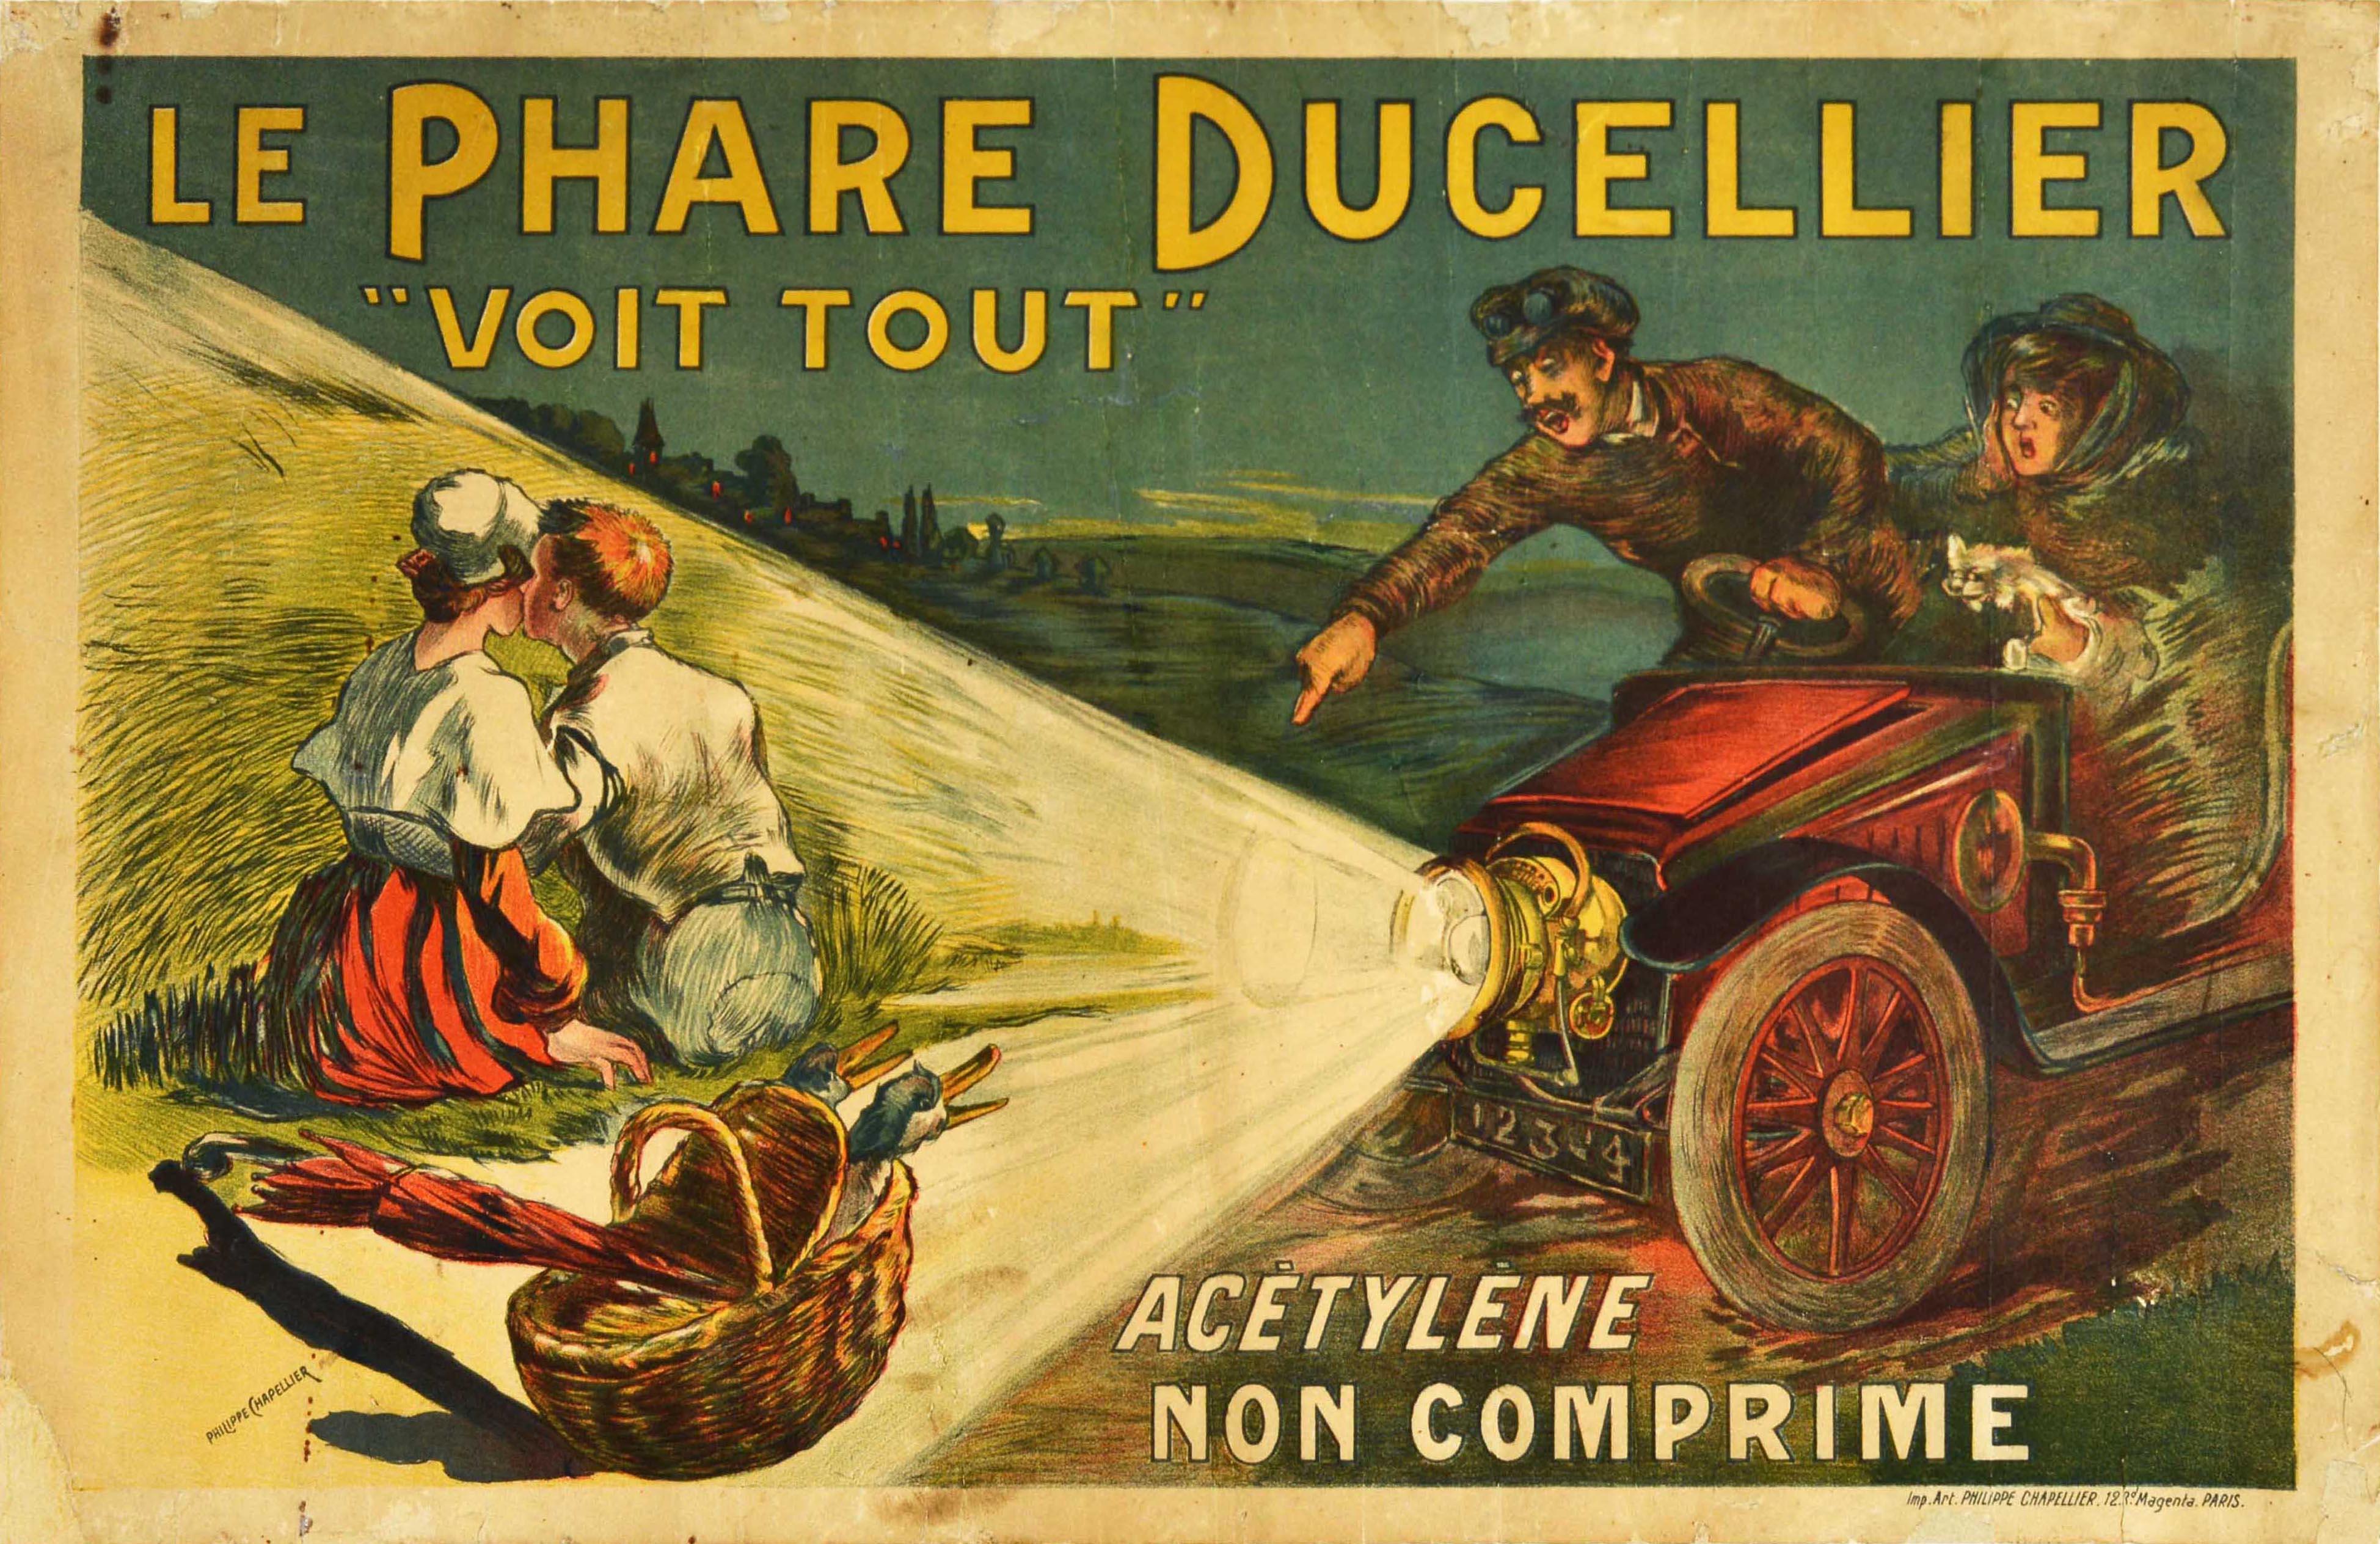 Philippe Chapellier Print - Original Antique Advertising Poster Le Phare Ducellier Car Headlights "Sees All"